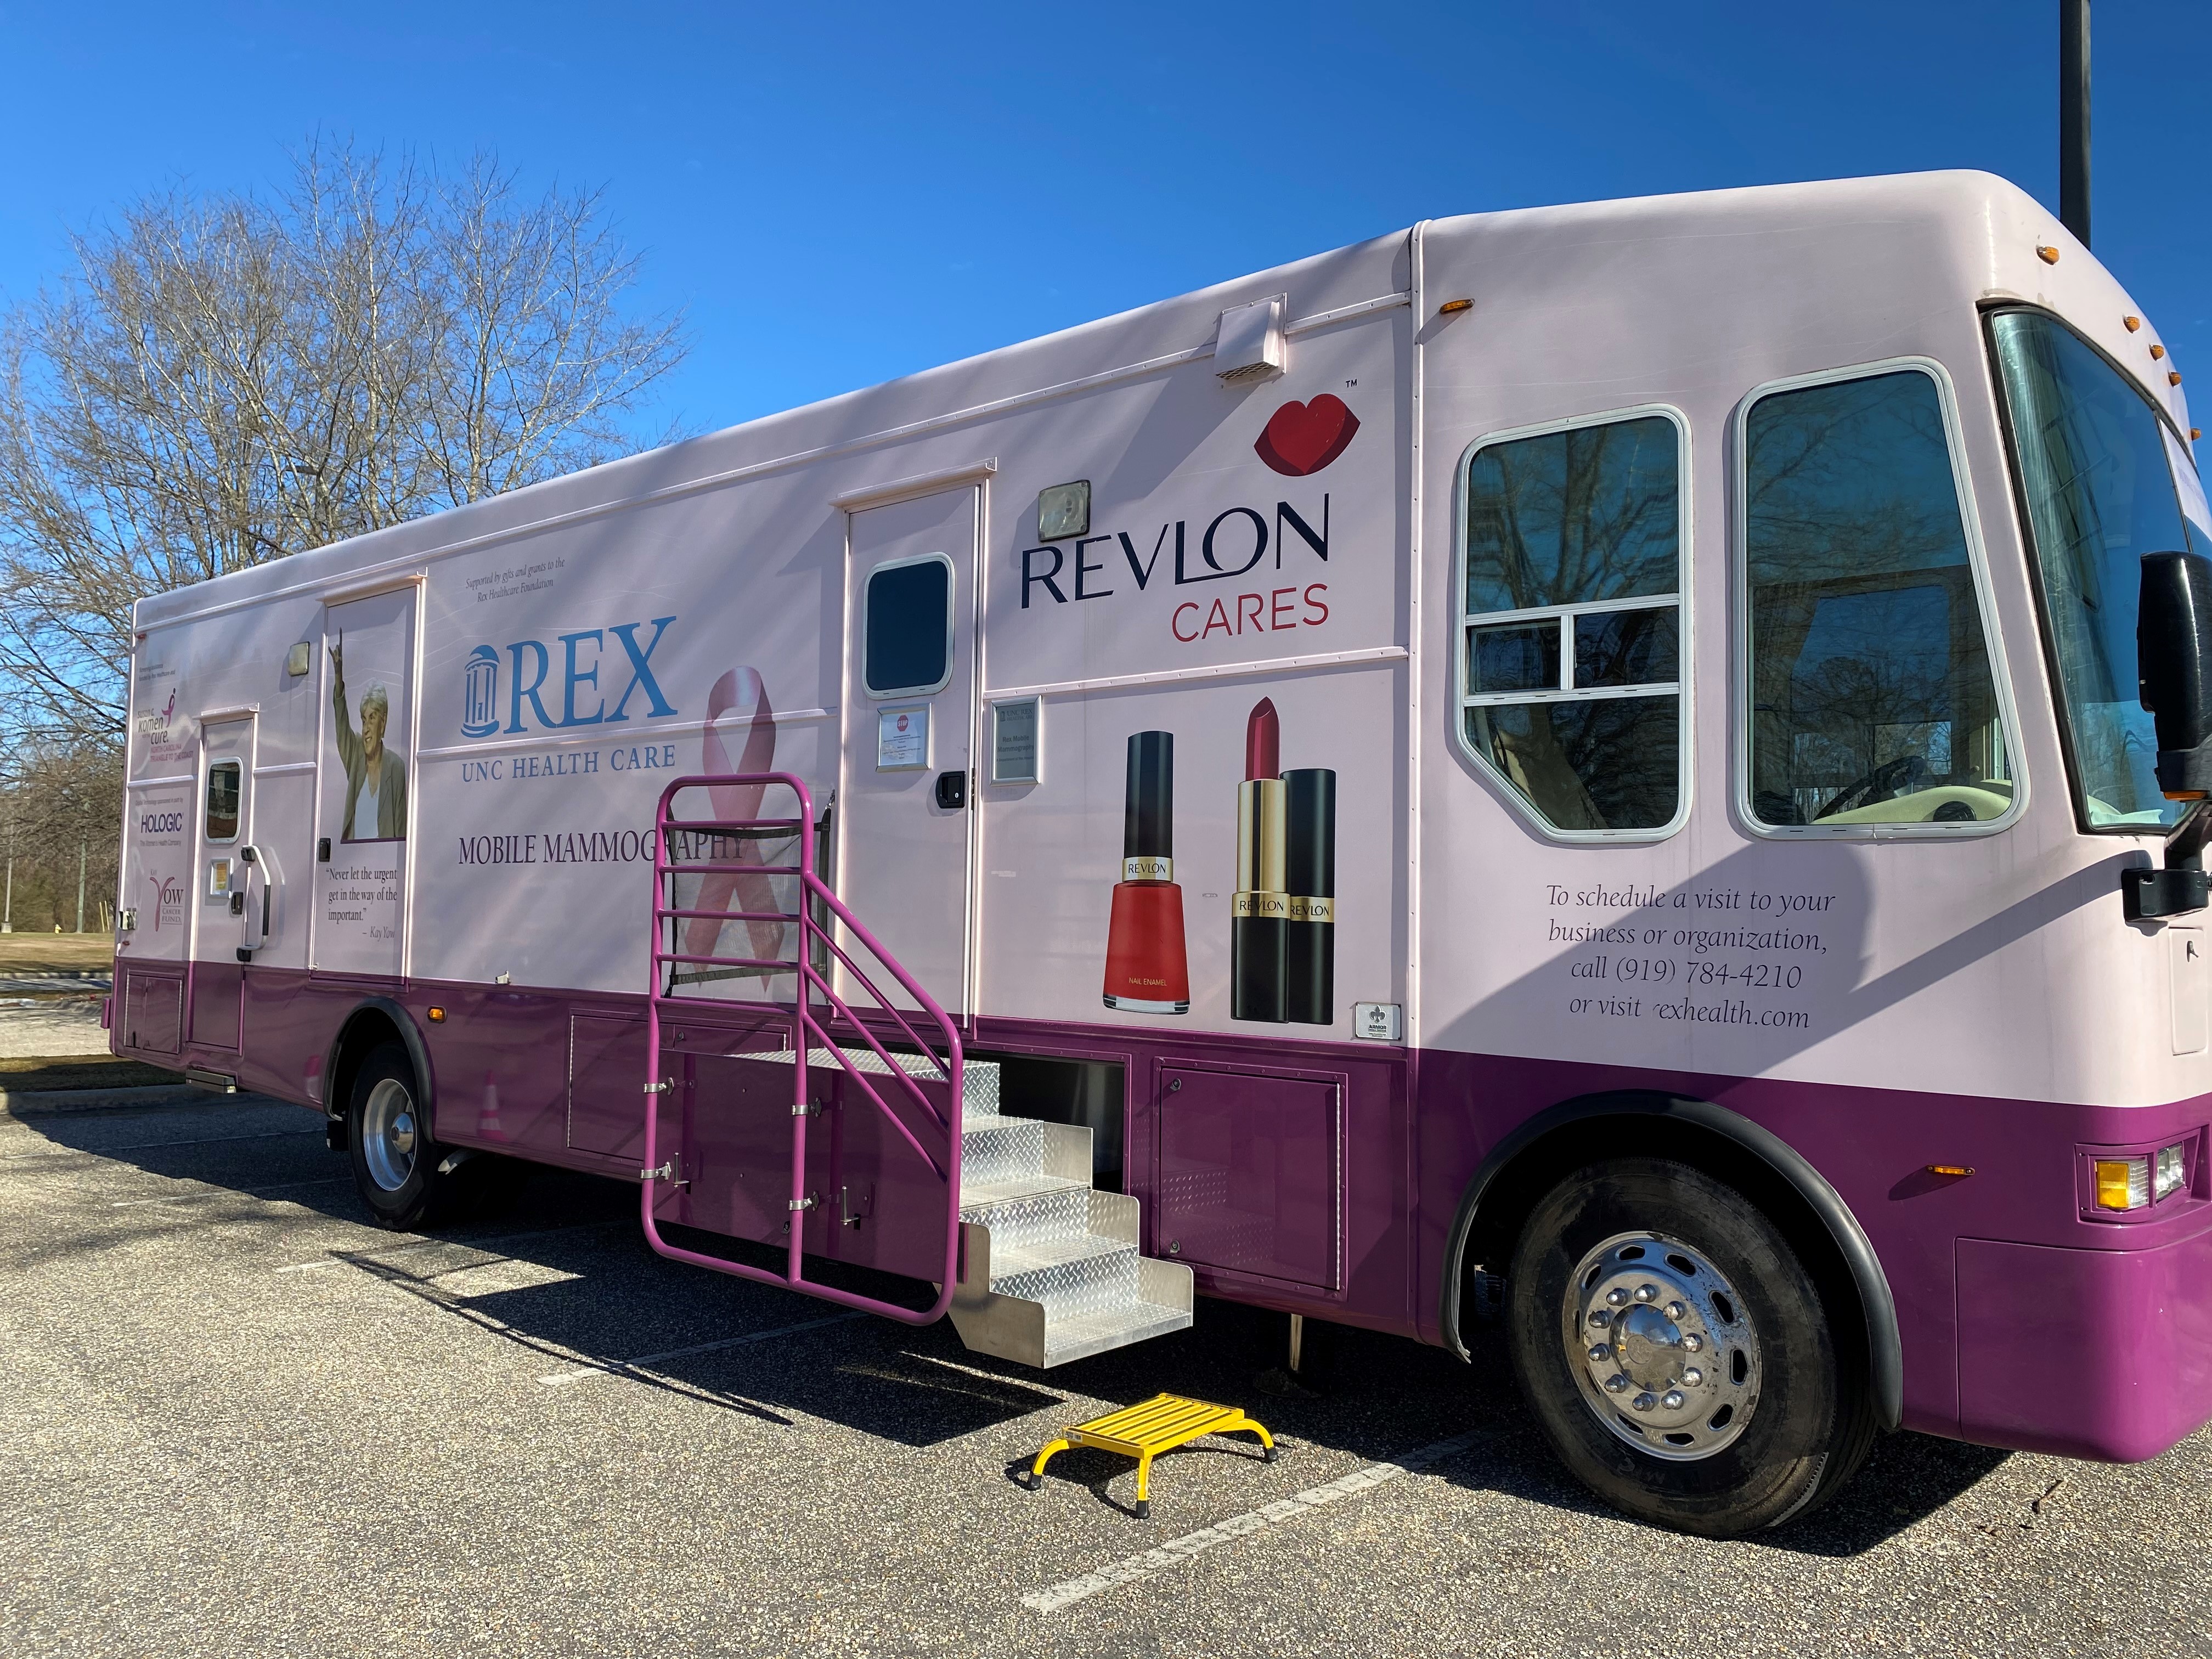 Rex Mobile Mammography On-site December 21st